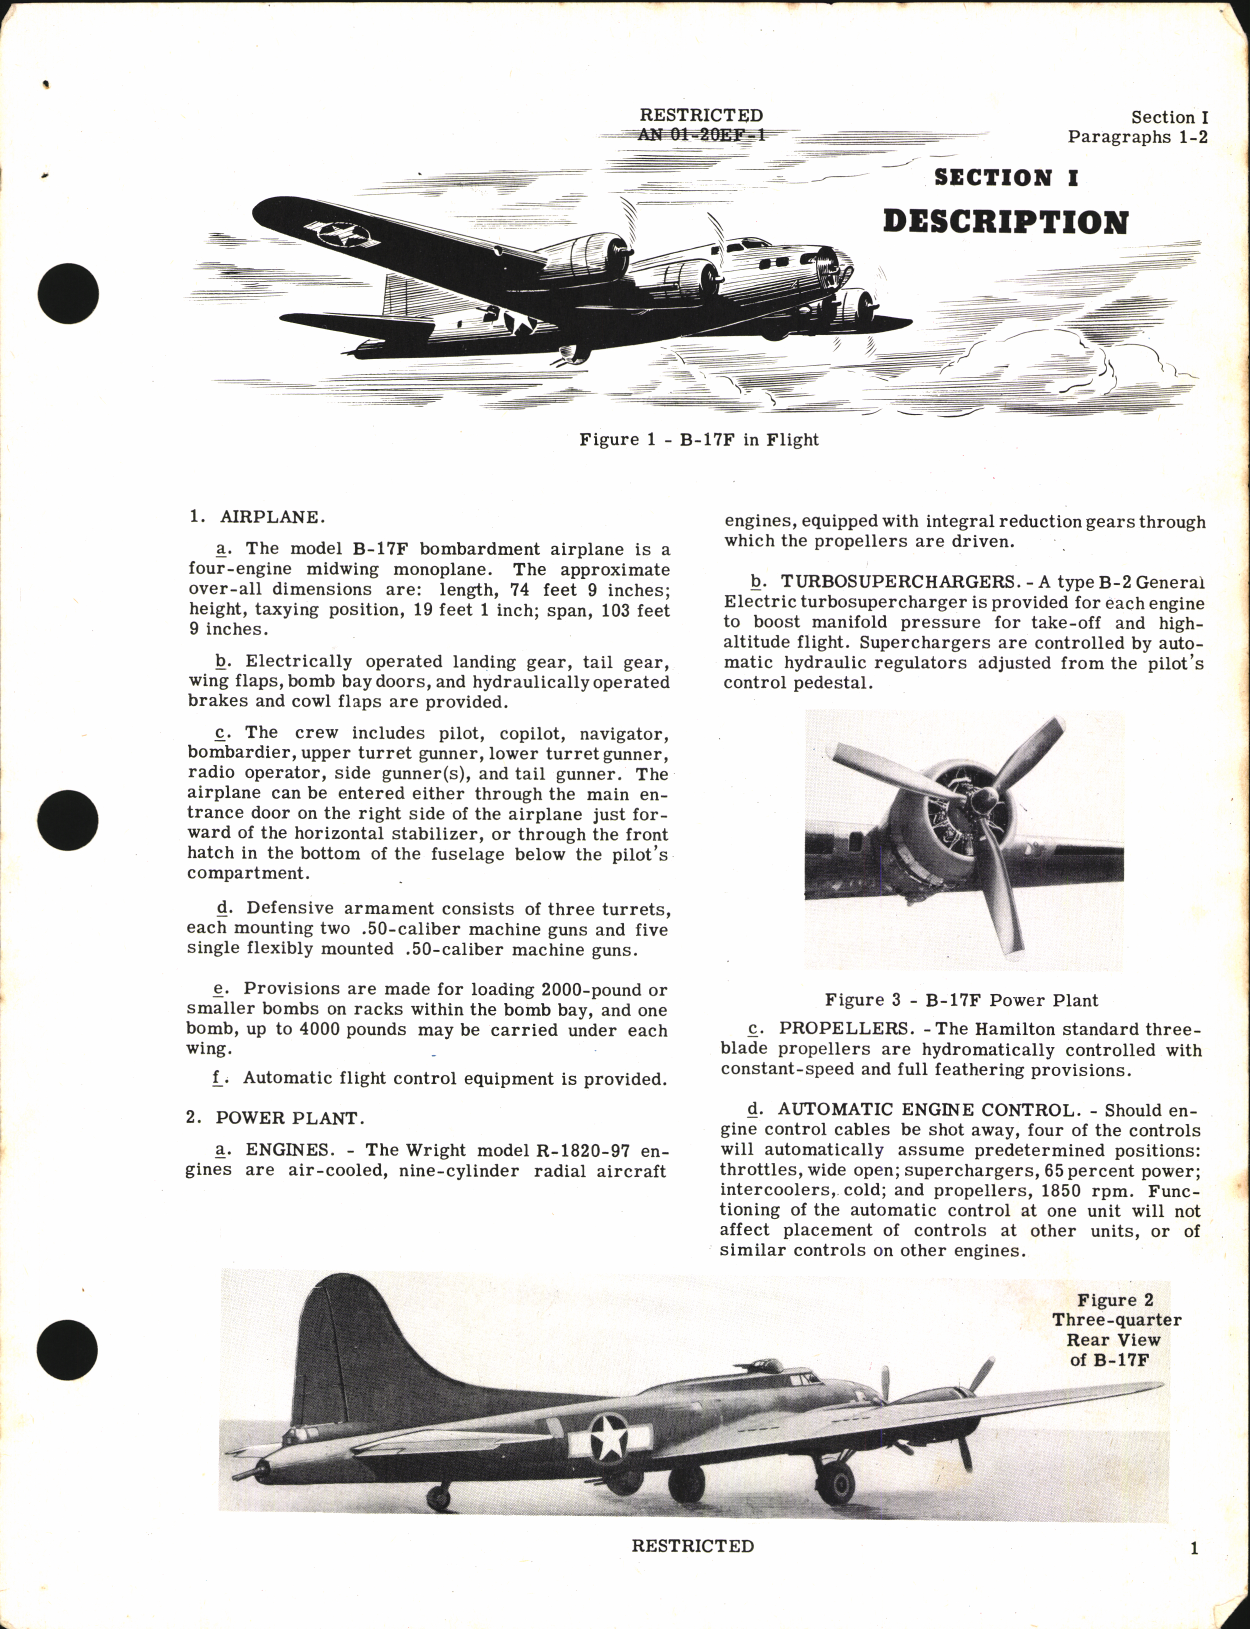 Sample page 5 from AirCorps Library document: Pilot's Flight Operating Instructions for B-17F Airplane